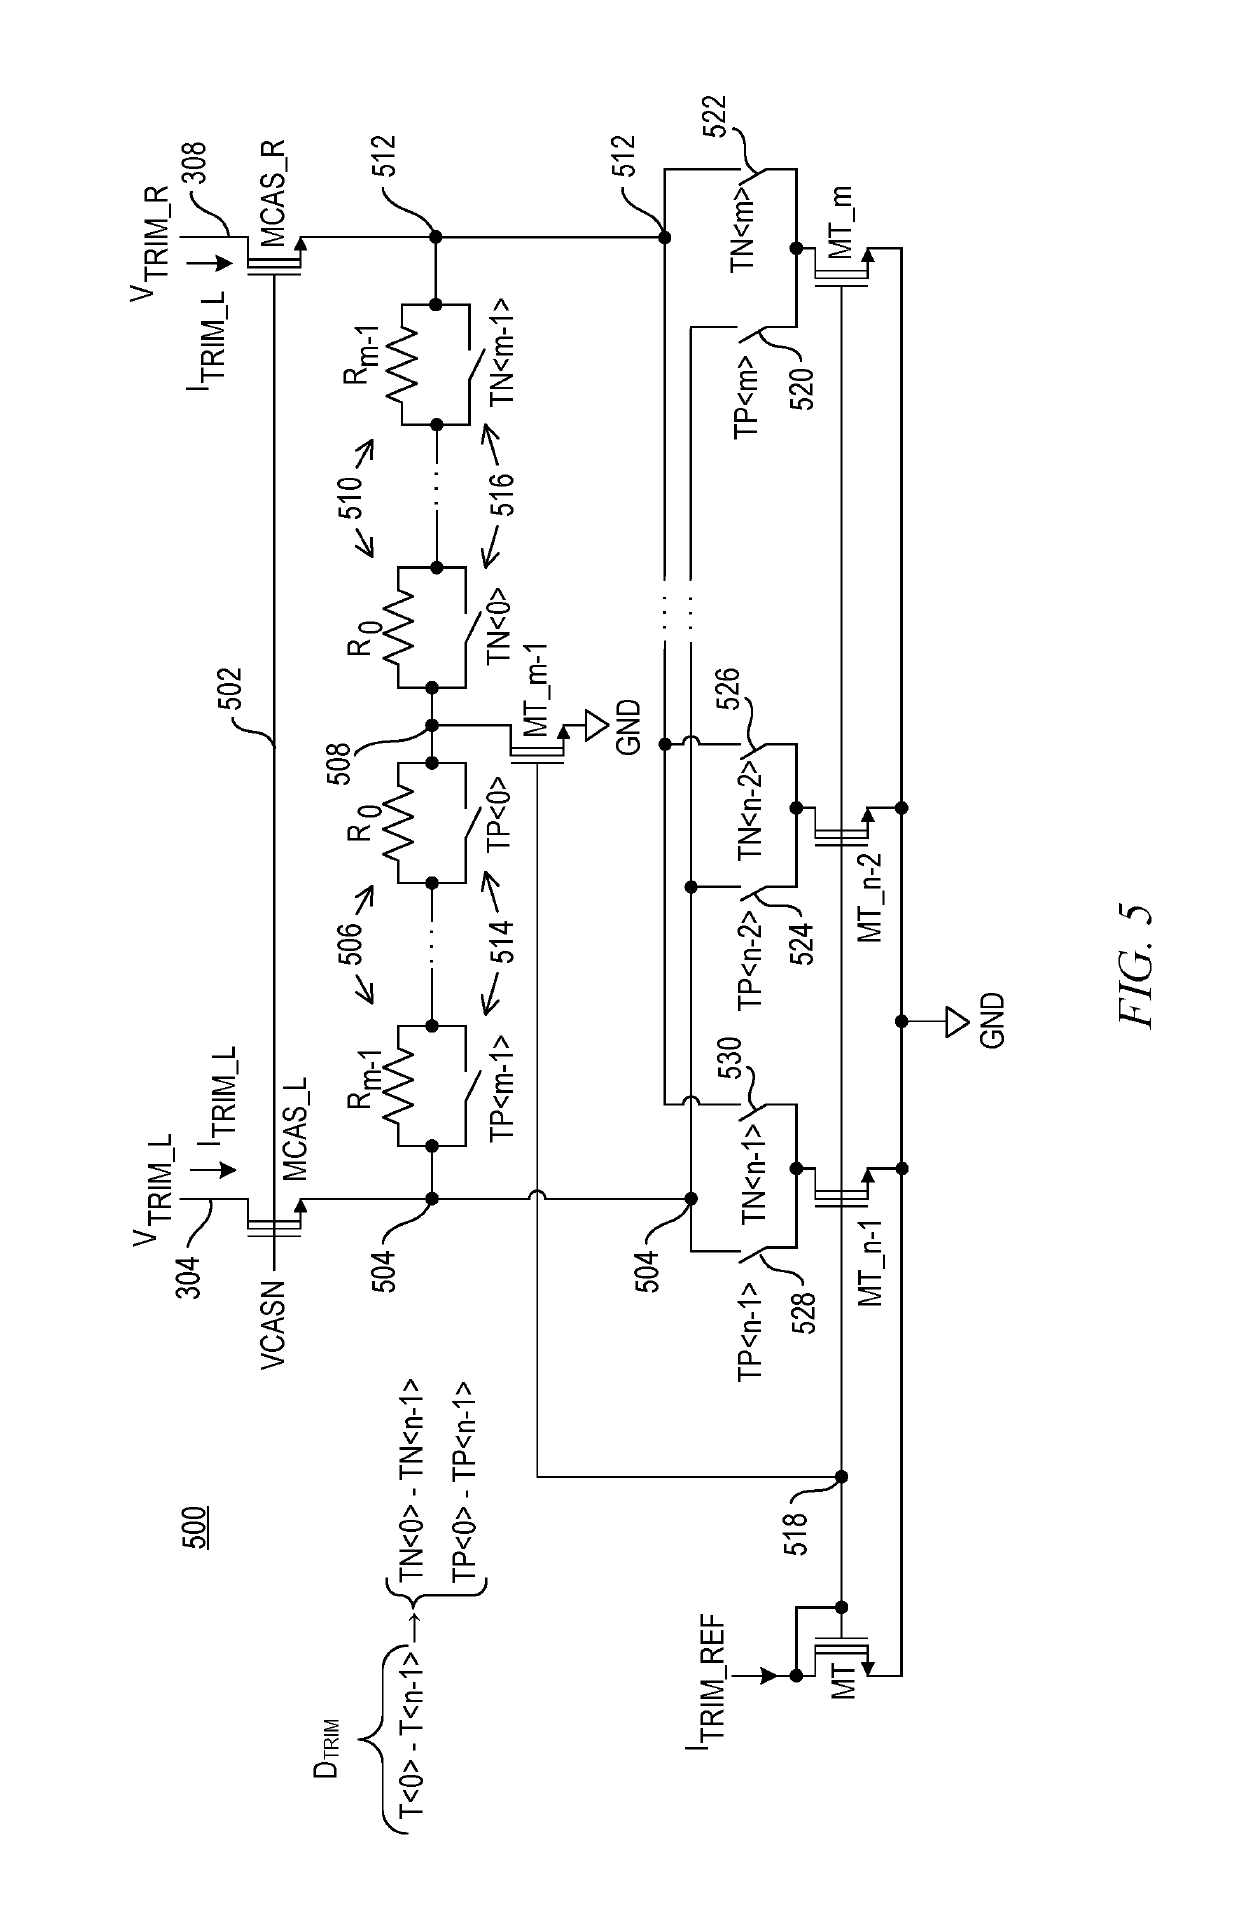 System and method for correcting offset voltage errors within a band gap circuit